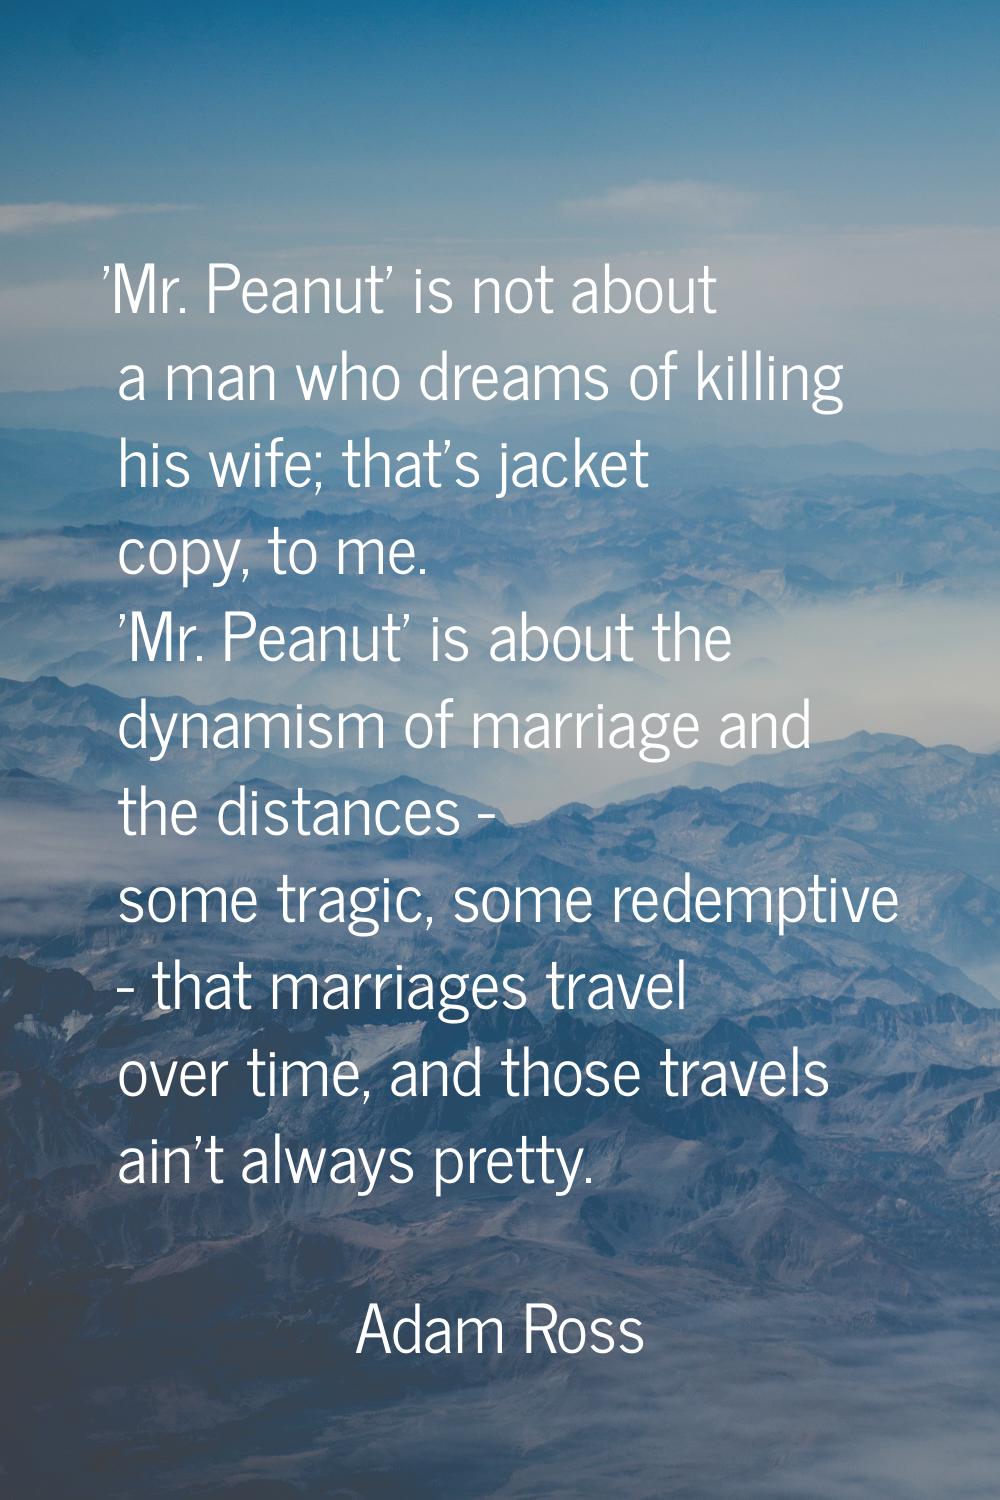 'Mr. Peanut' is not about a man who dreams of killing his wife; that's jacket copy, to me. 'Mr. Pea